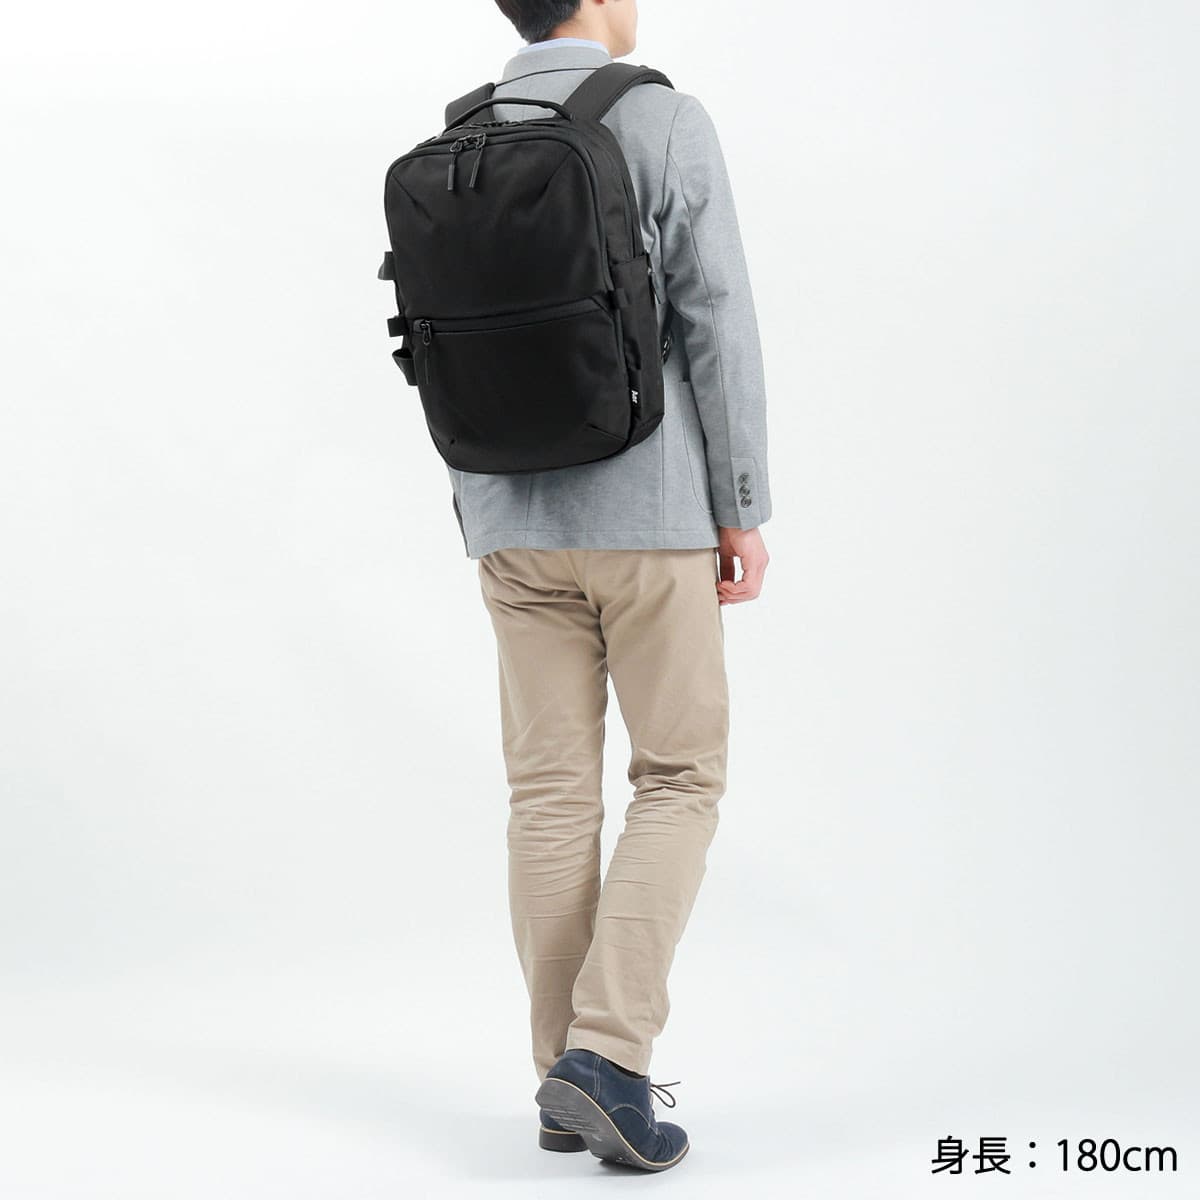 Aer エアー Travel Collection Flight Pack 3 3wayバックパック 20L ...